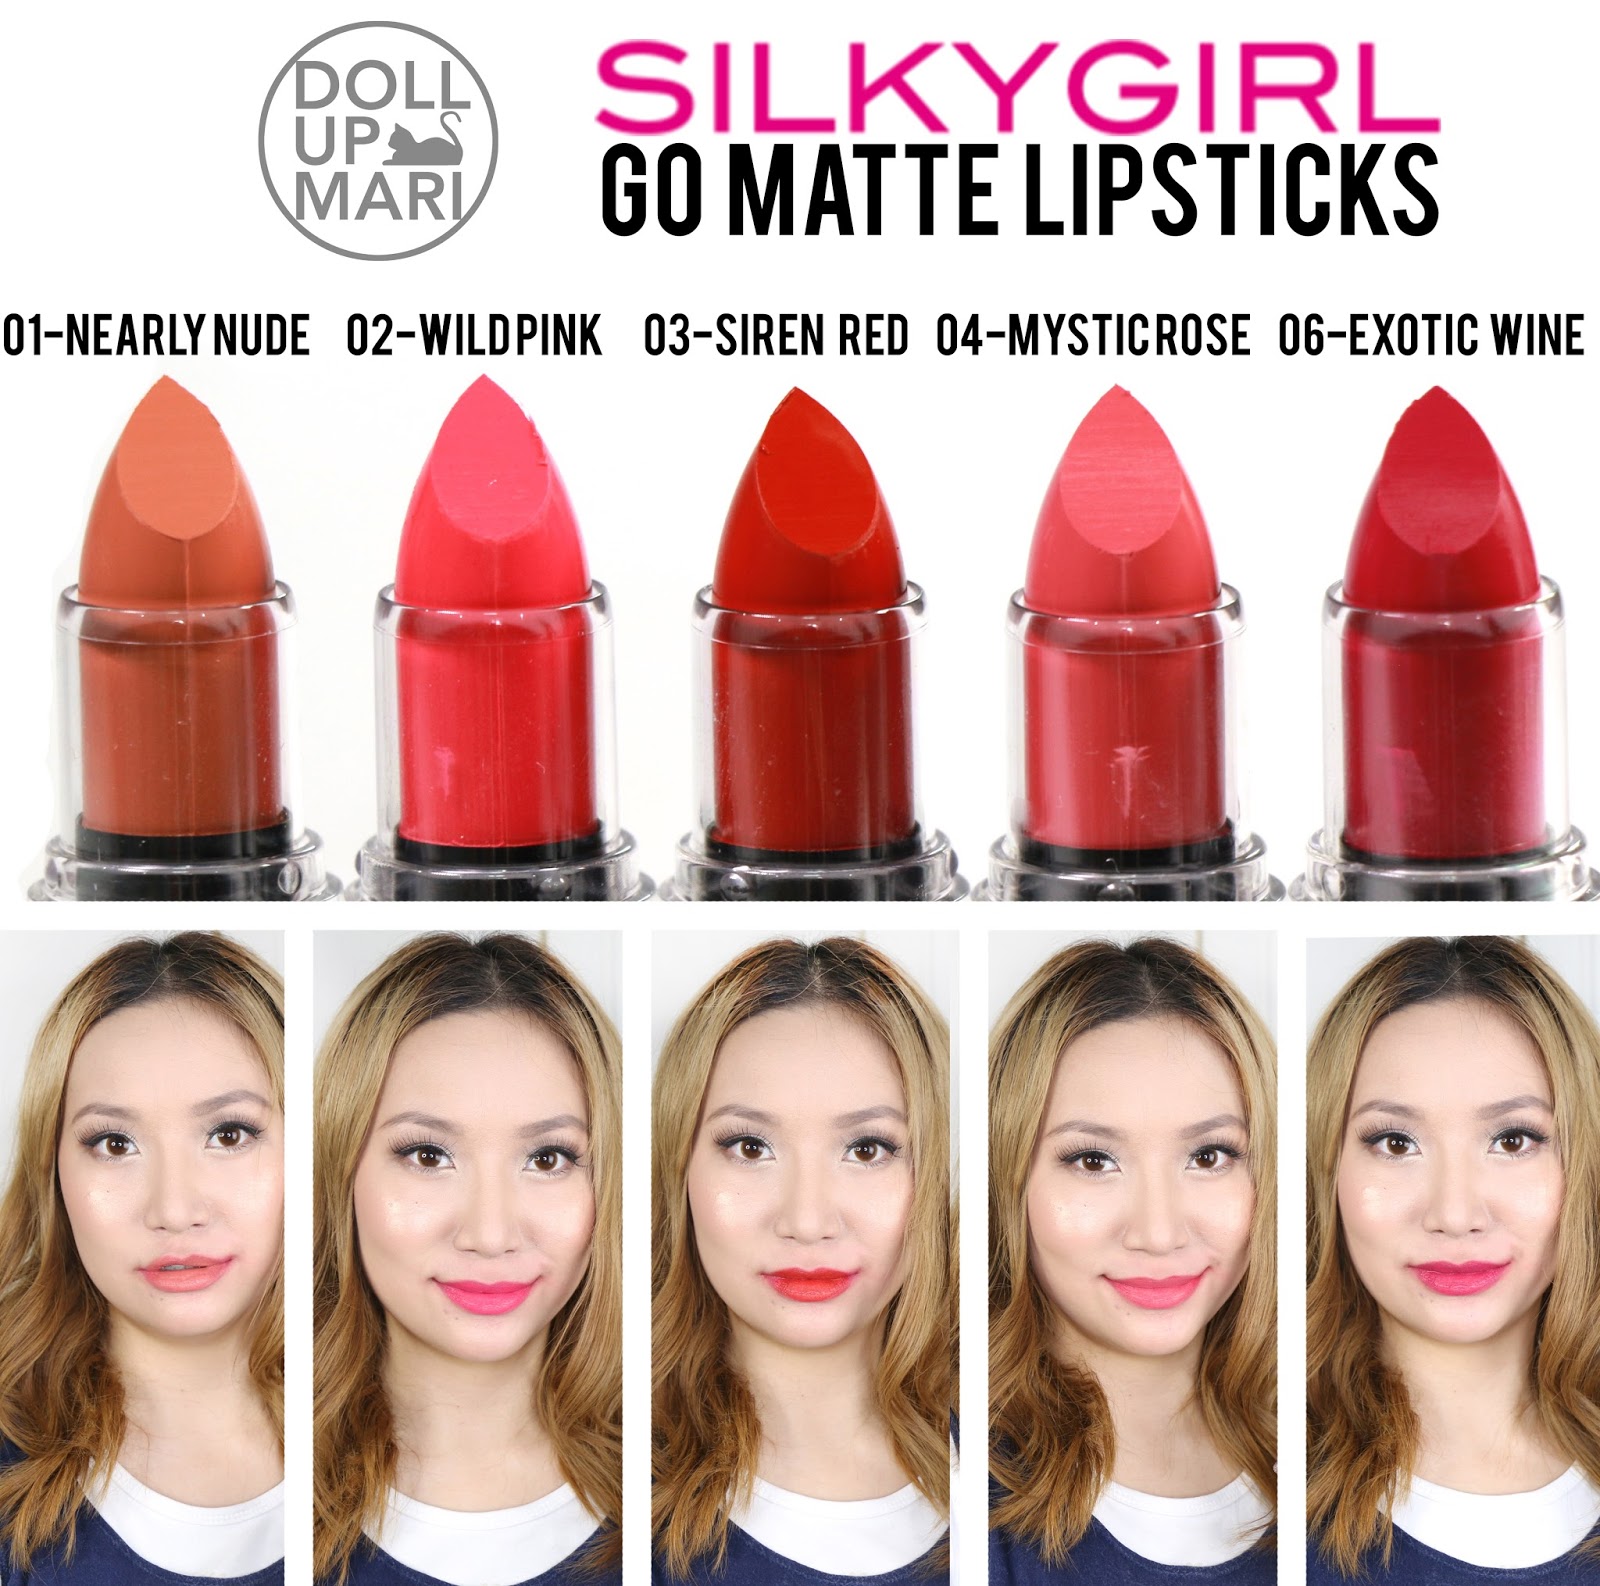 Silkygirl Go Matte Lipsticks Review and Swatches | Doll Up